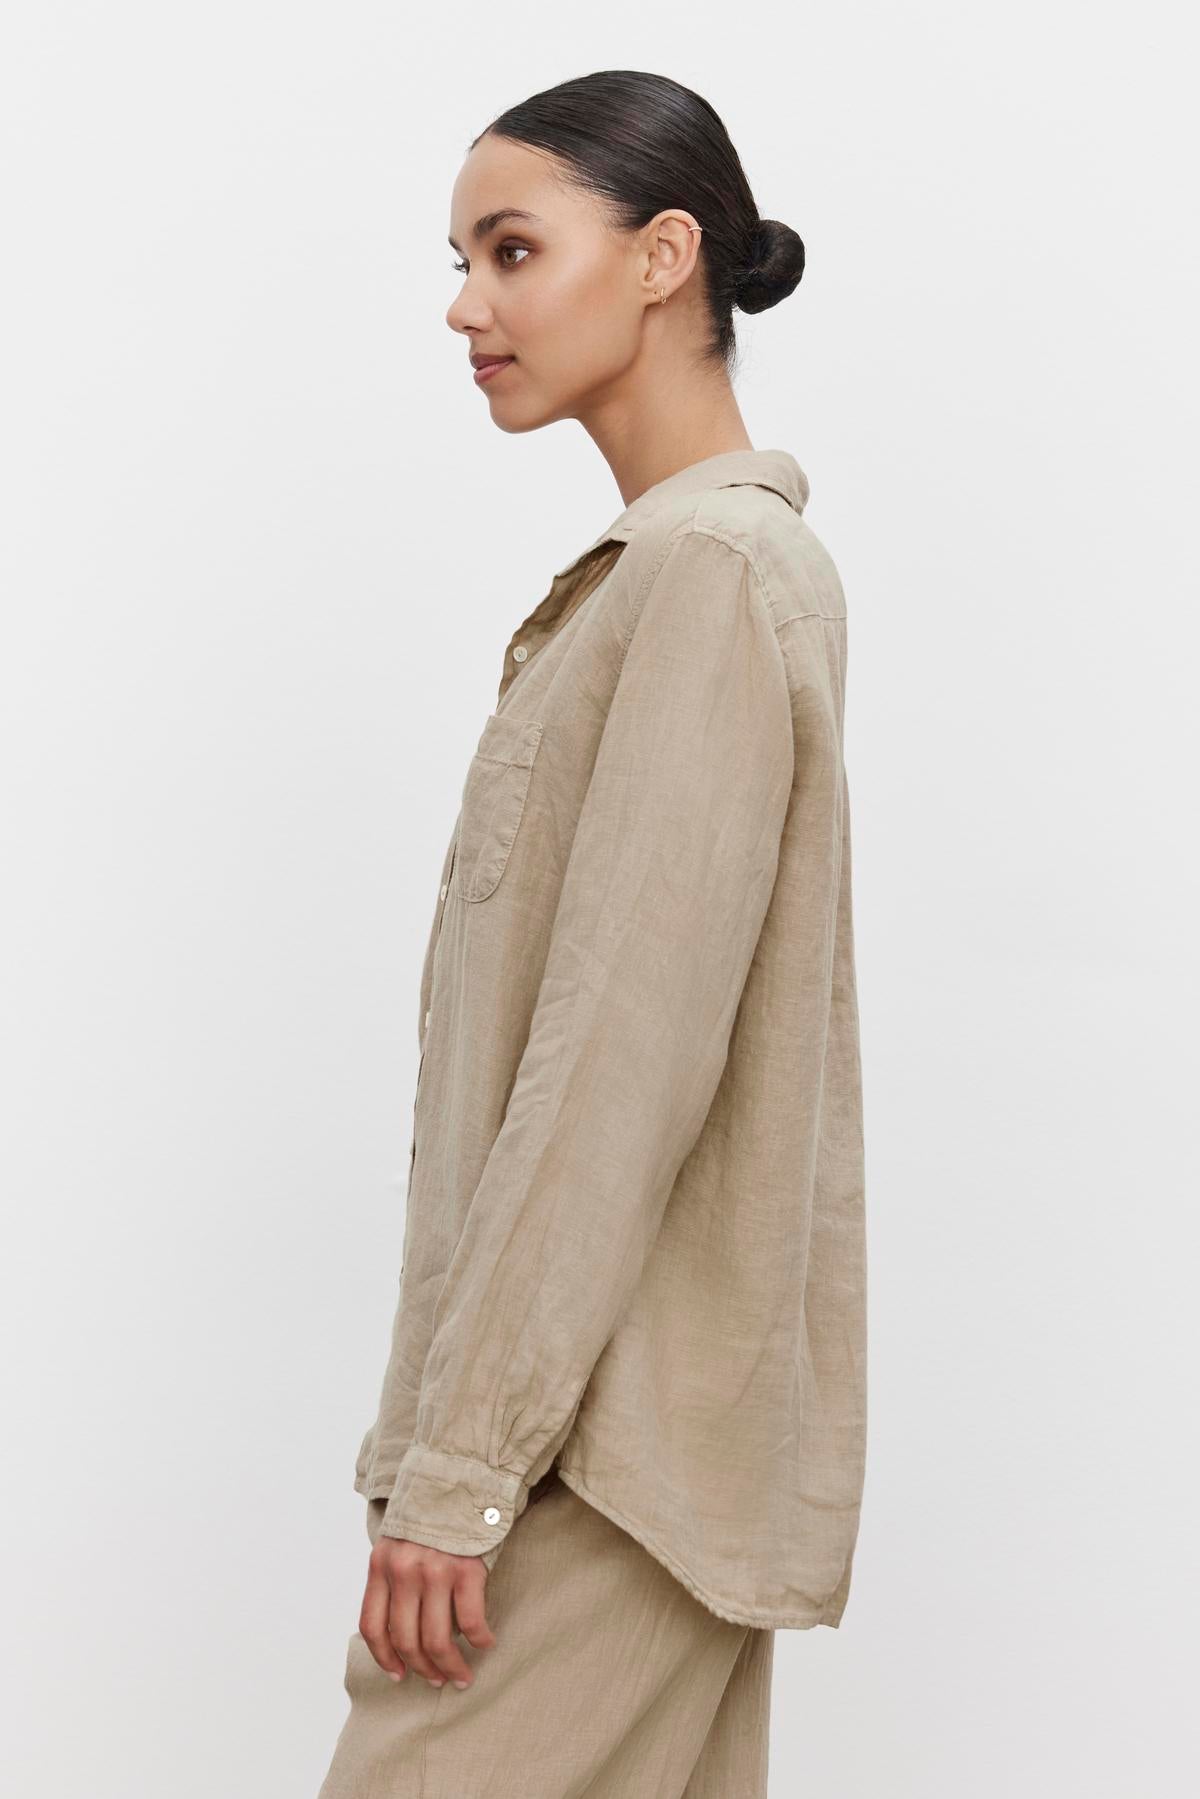 A person with dark hair tied in a bun is standing sideways, wearing a light beige linen button-up shirt and matching pants, featuring a scooped hemline against a plain white background. The shirt is the MULHOLLAND LINEN SHIRT by Velvet by Jenny Graham.-36463469691073